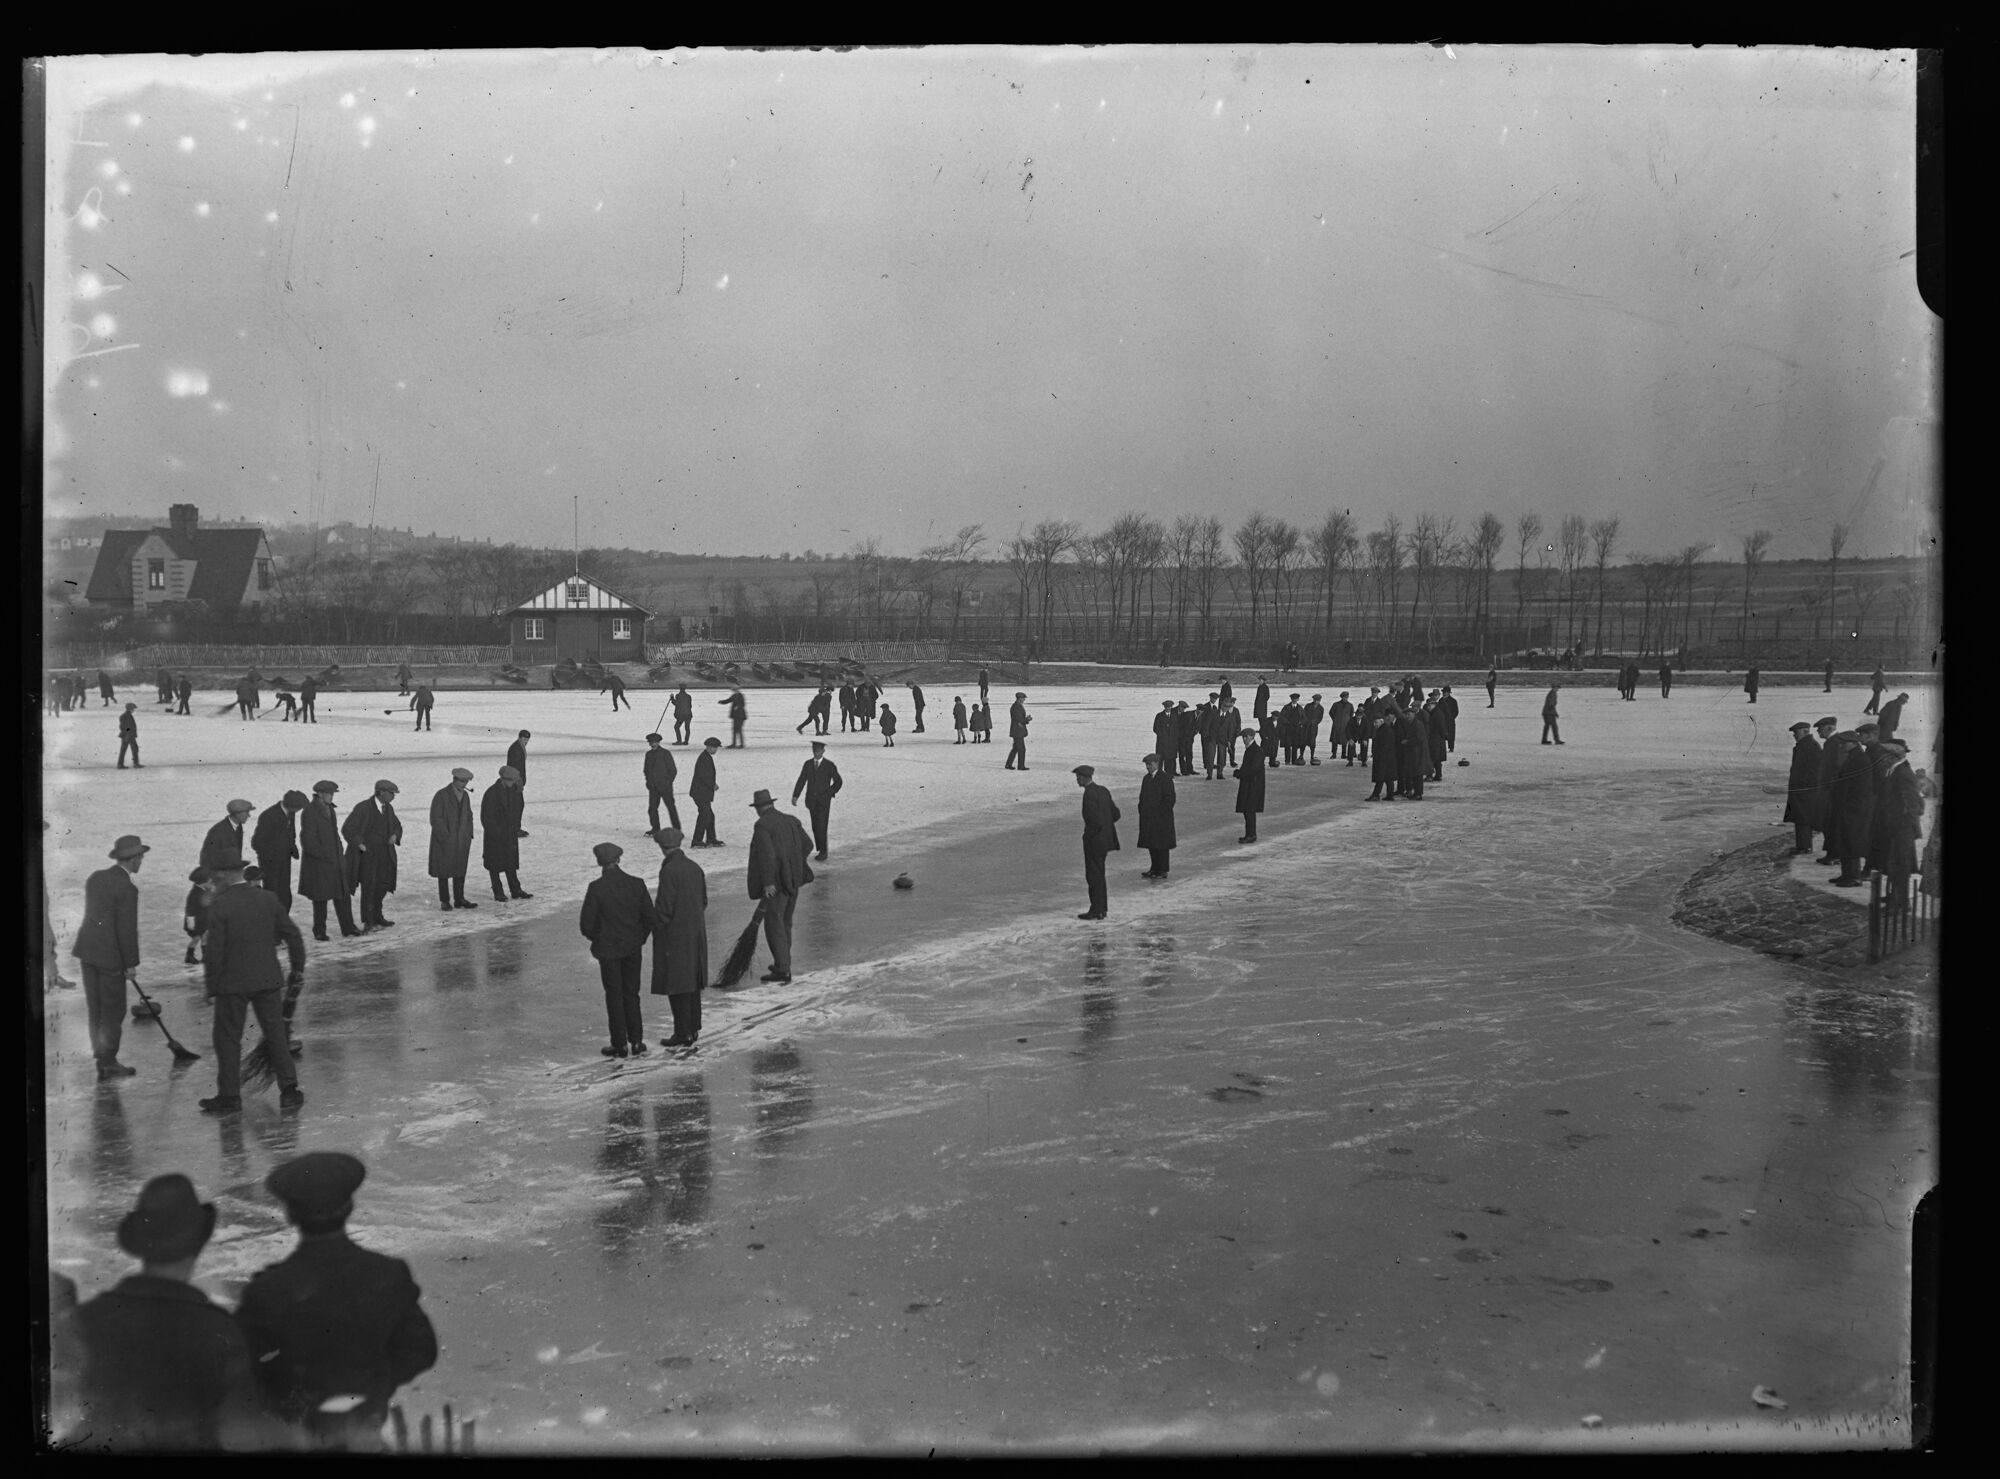 Curling on the Park Lake, Barrow-in-Furness 